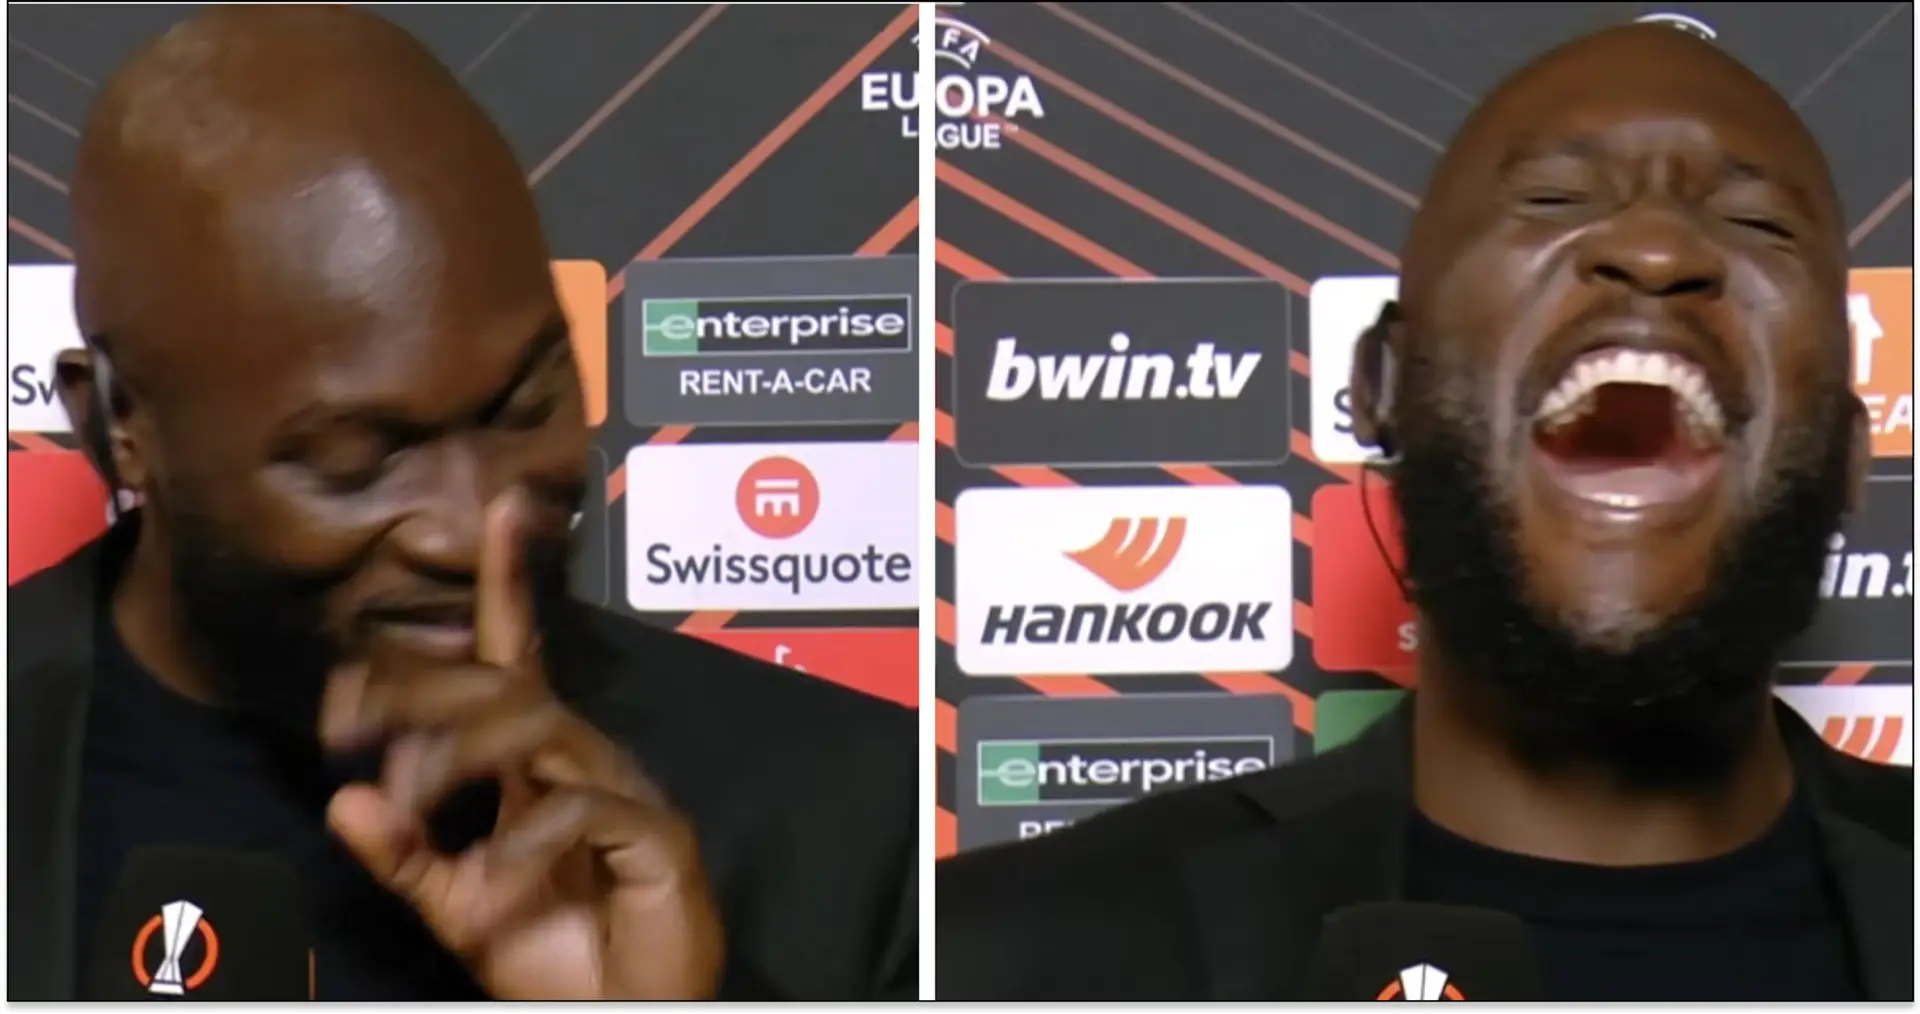 'I have to be smart': Lukaku laughs, puts finger to mouth when asked about his future